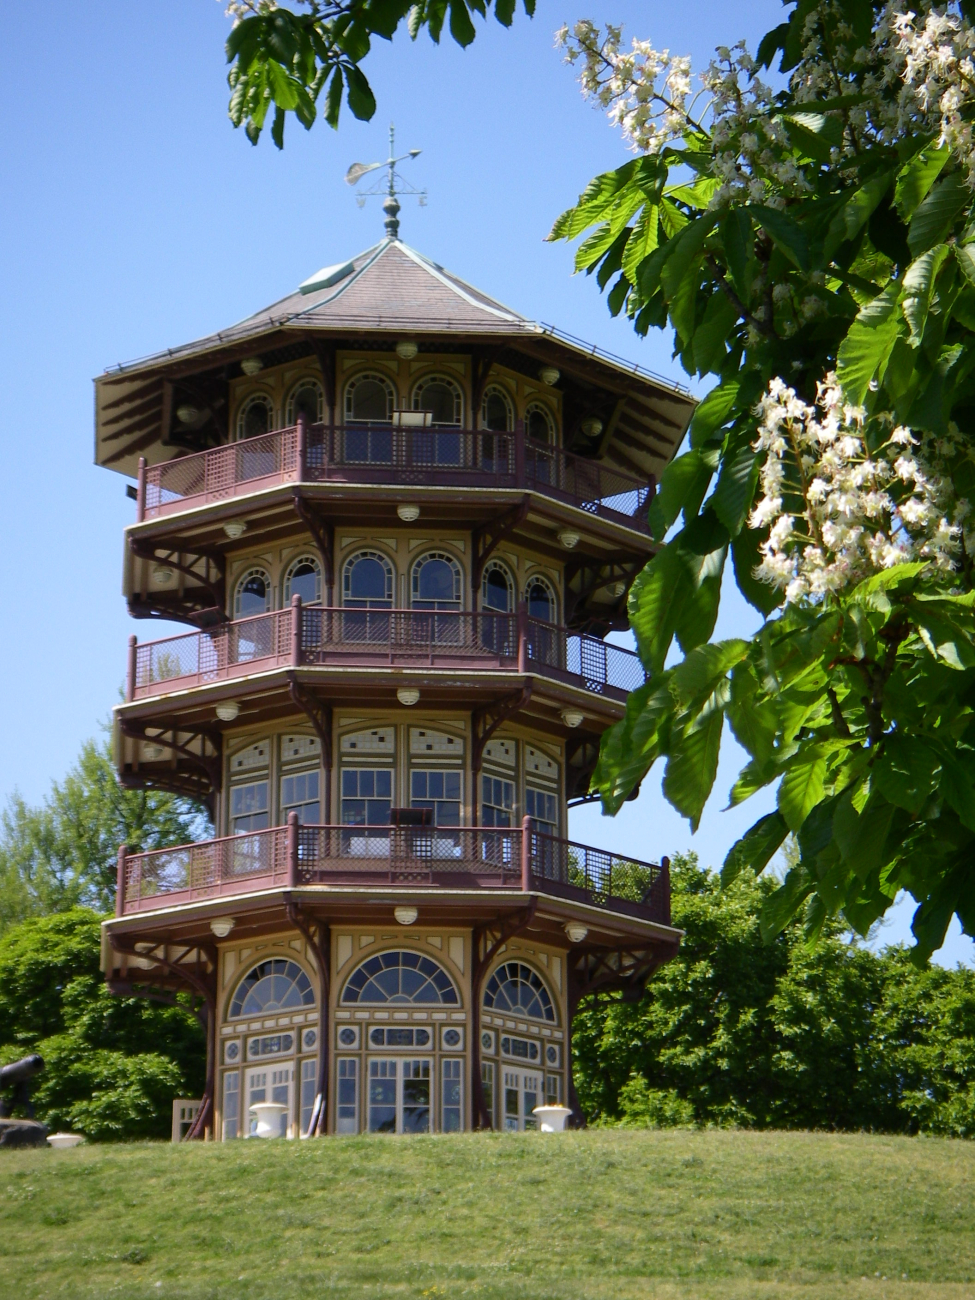 The Patterson Park Pagoda on Fort Hill, Baltimore